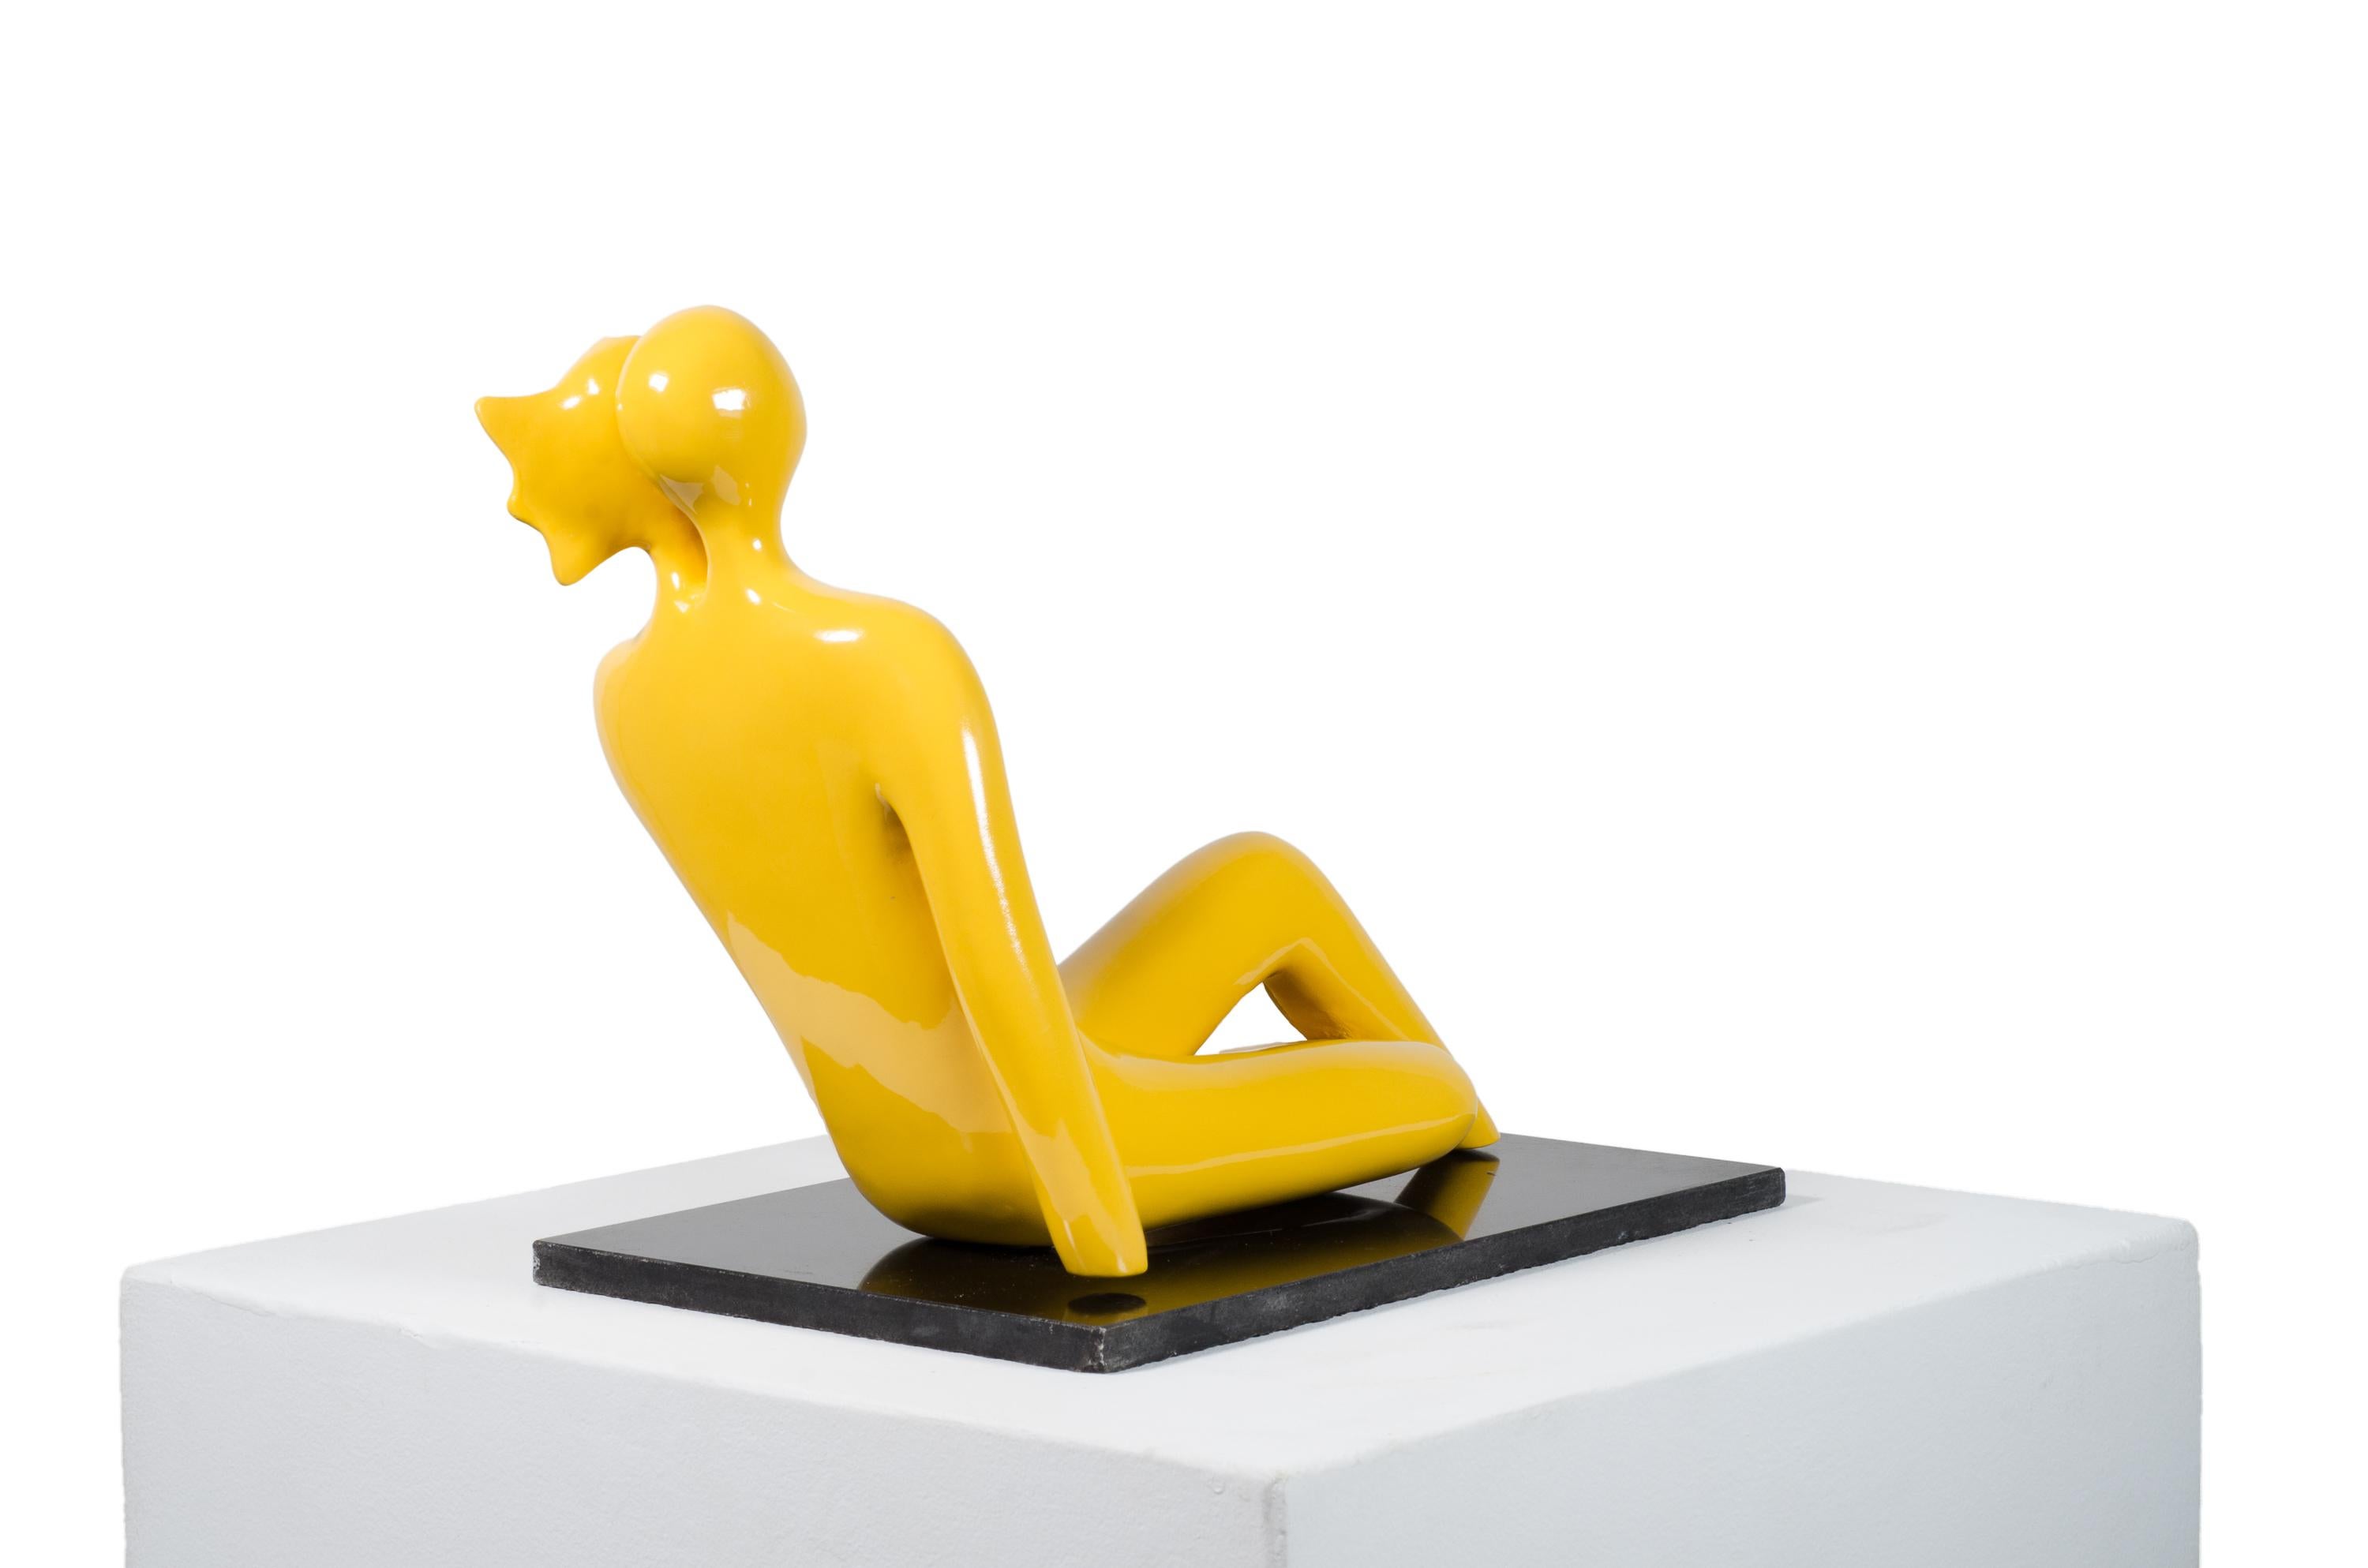 Soul Mates #2 (in yellow) When in love their souls and bodies fuse into just one - Gold Abstract Sculpture by Beatriz Gerenstein